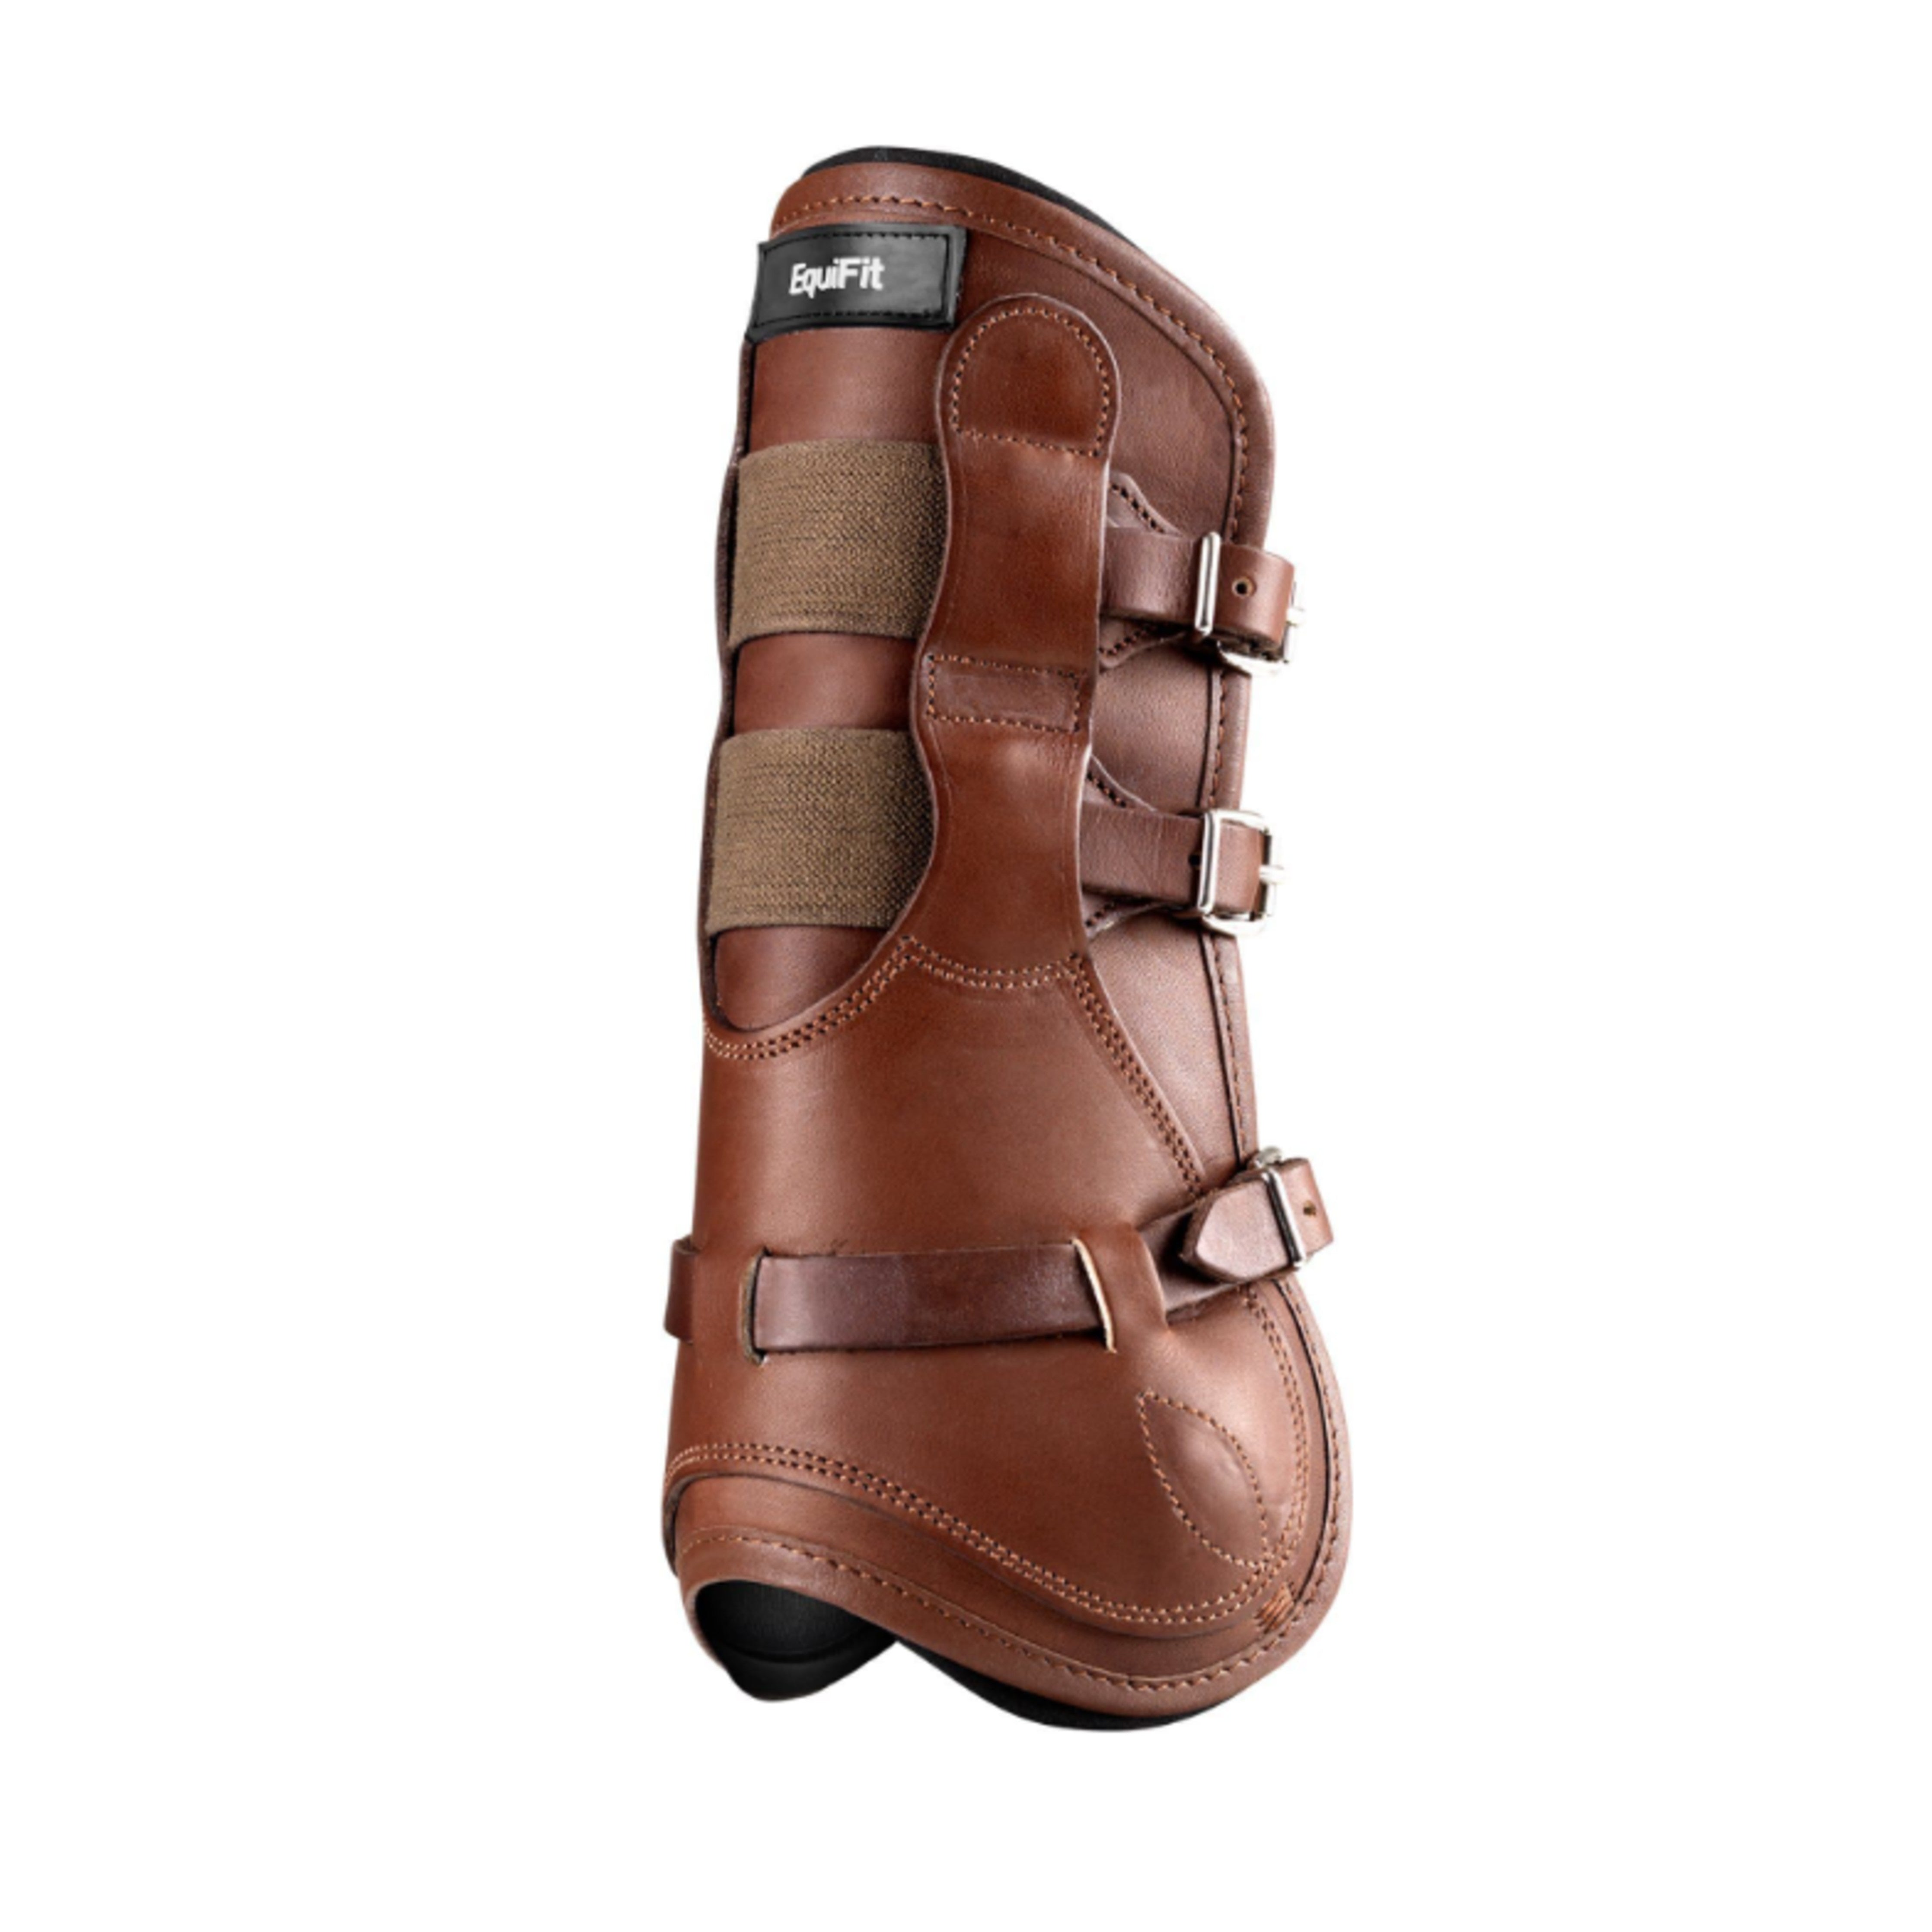 EquiFit T-Boot Luxe Open Front